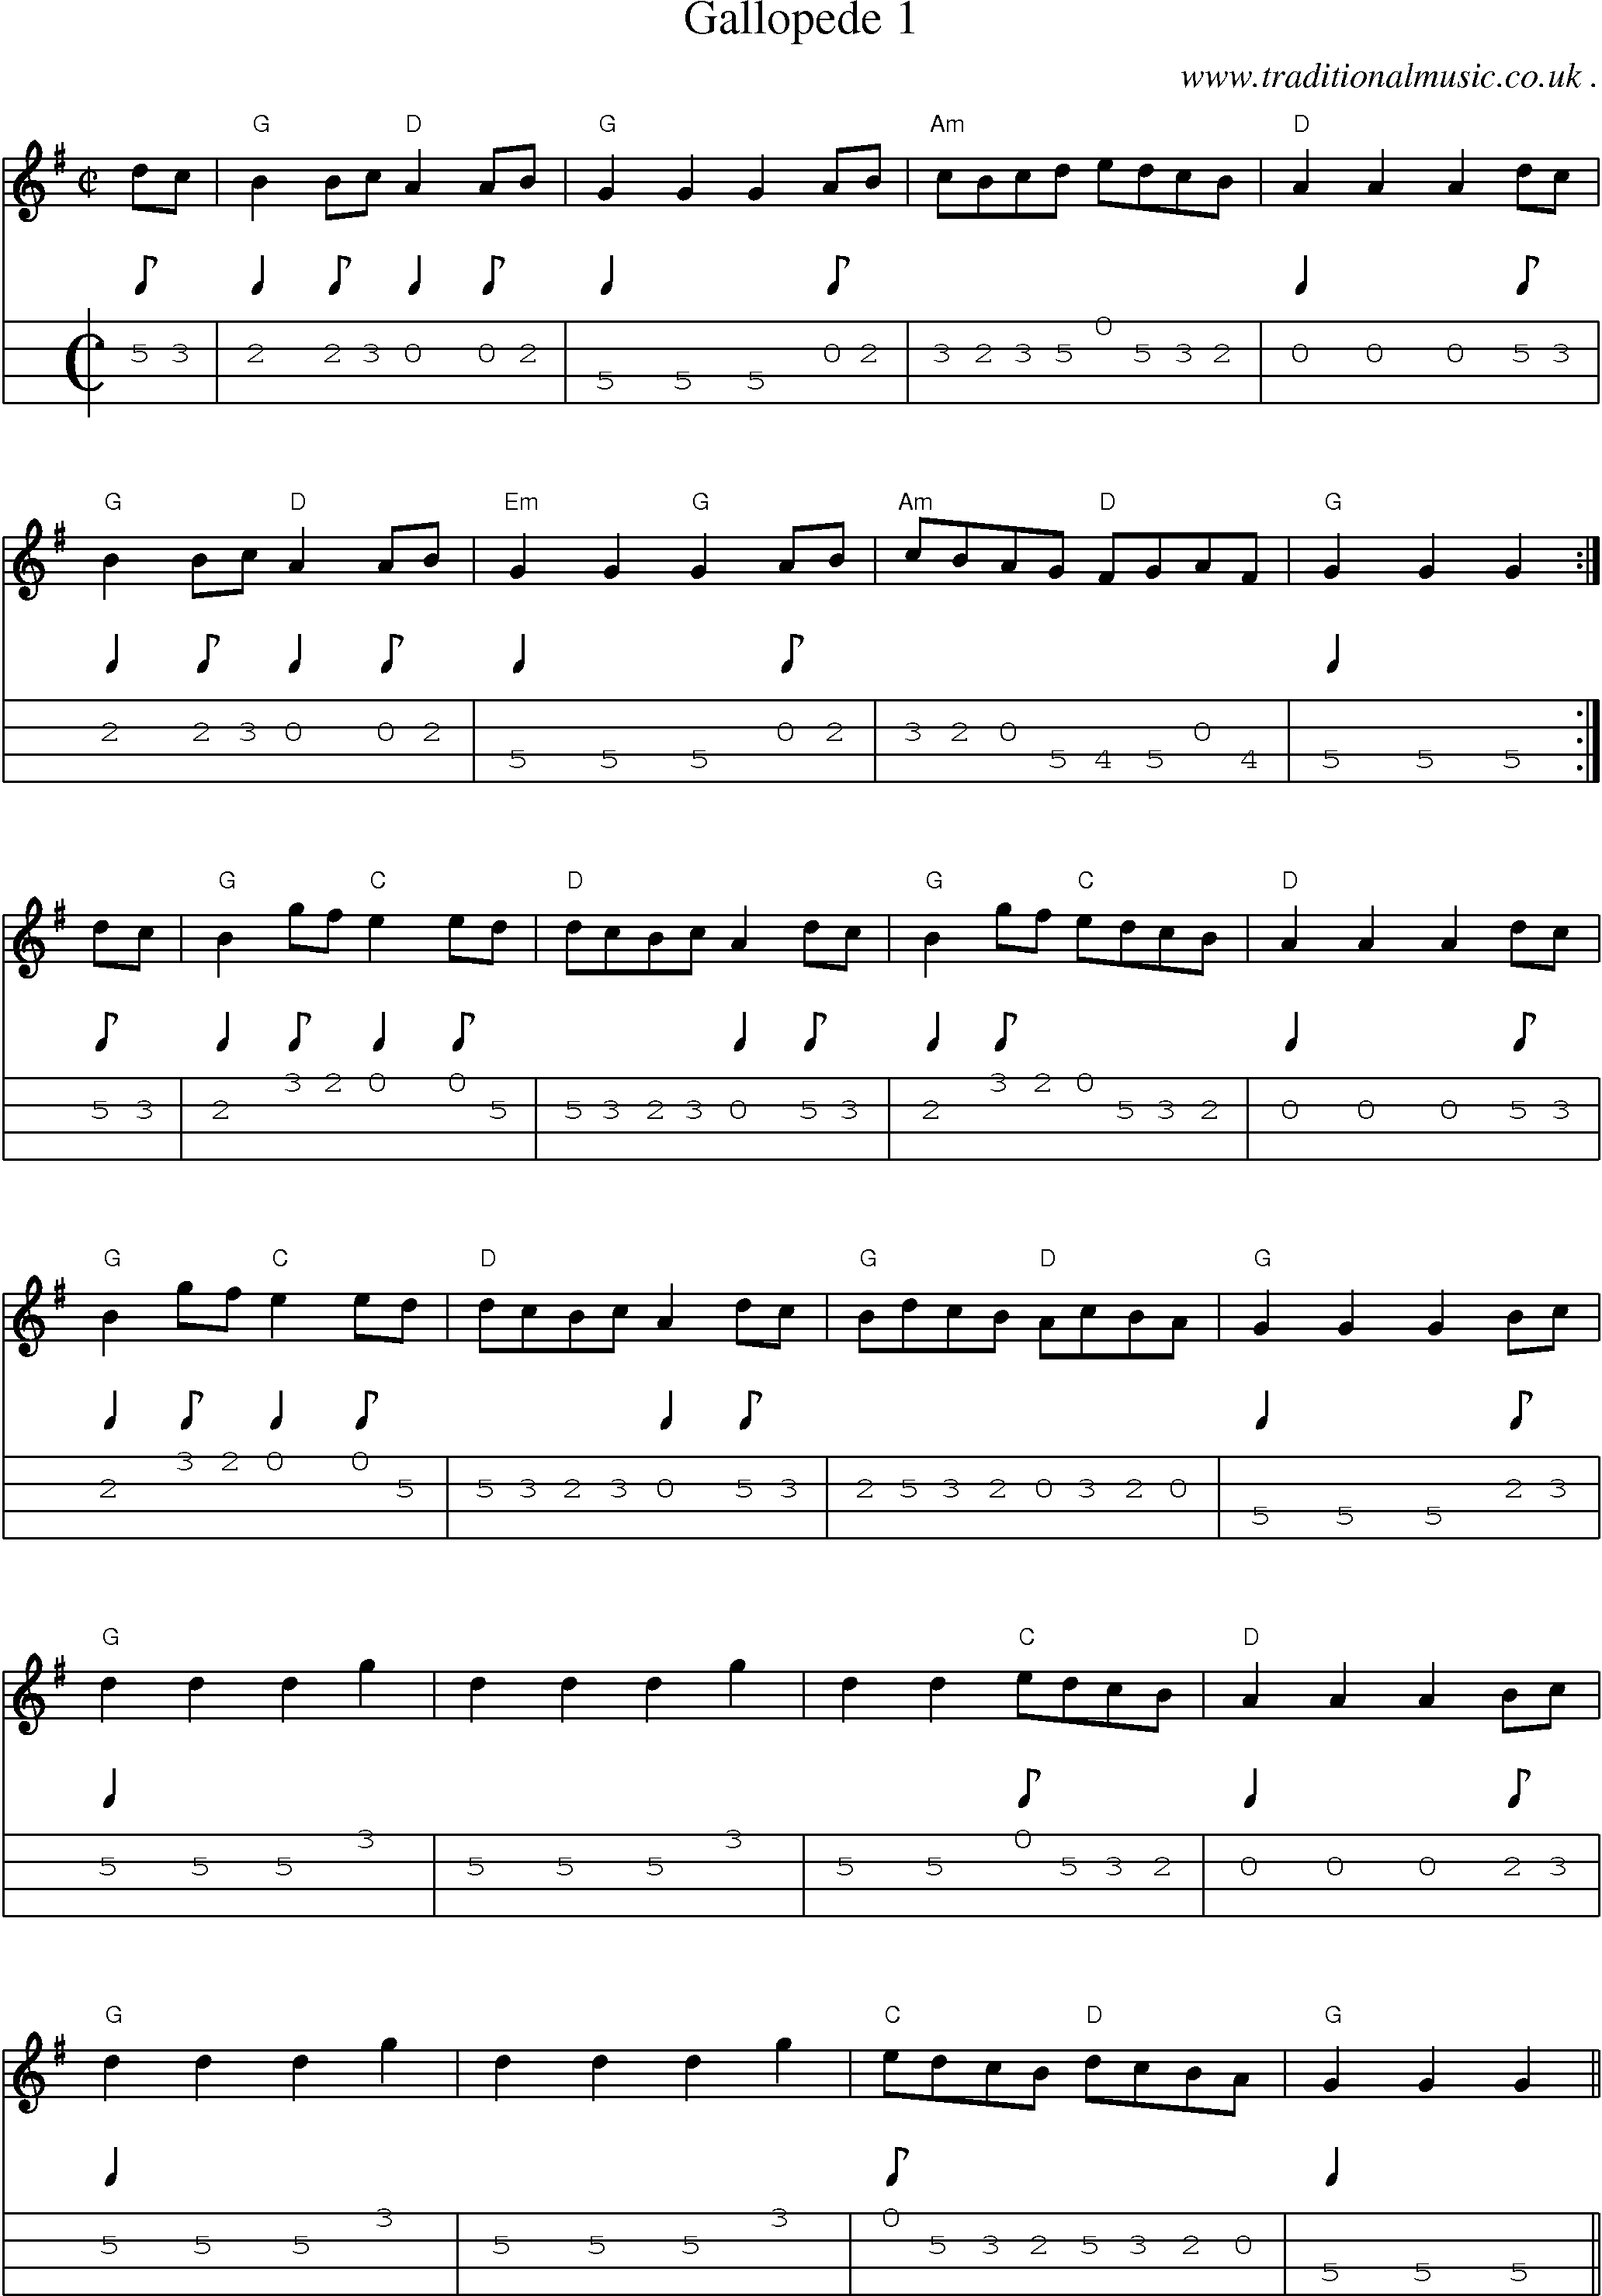 Music Score and Mandolin Tabs for Gallopede 1